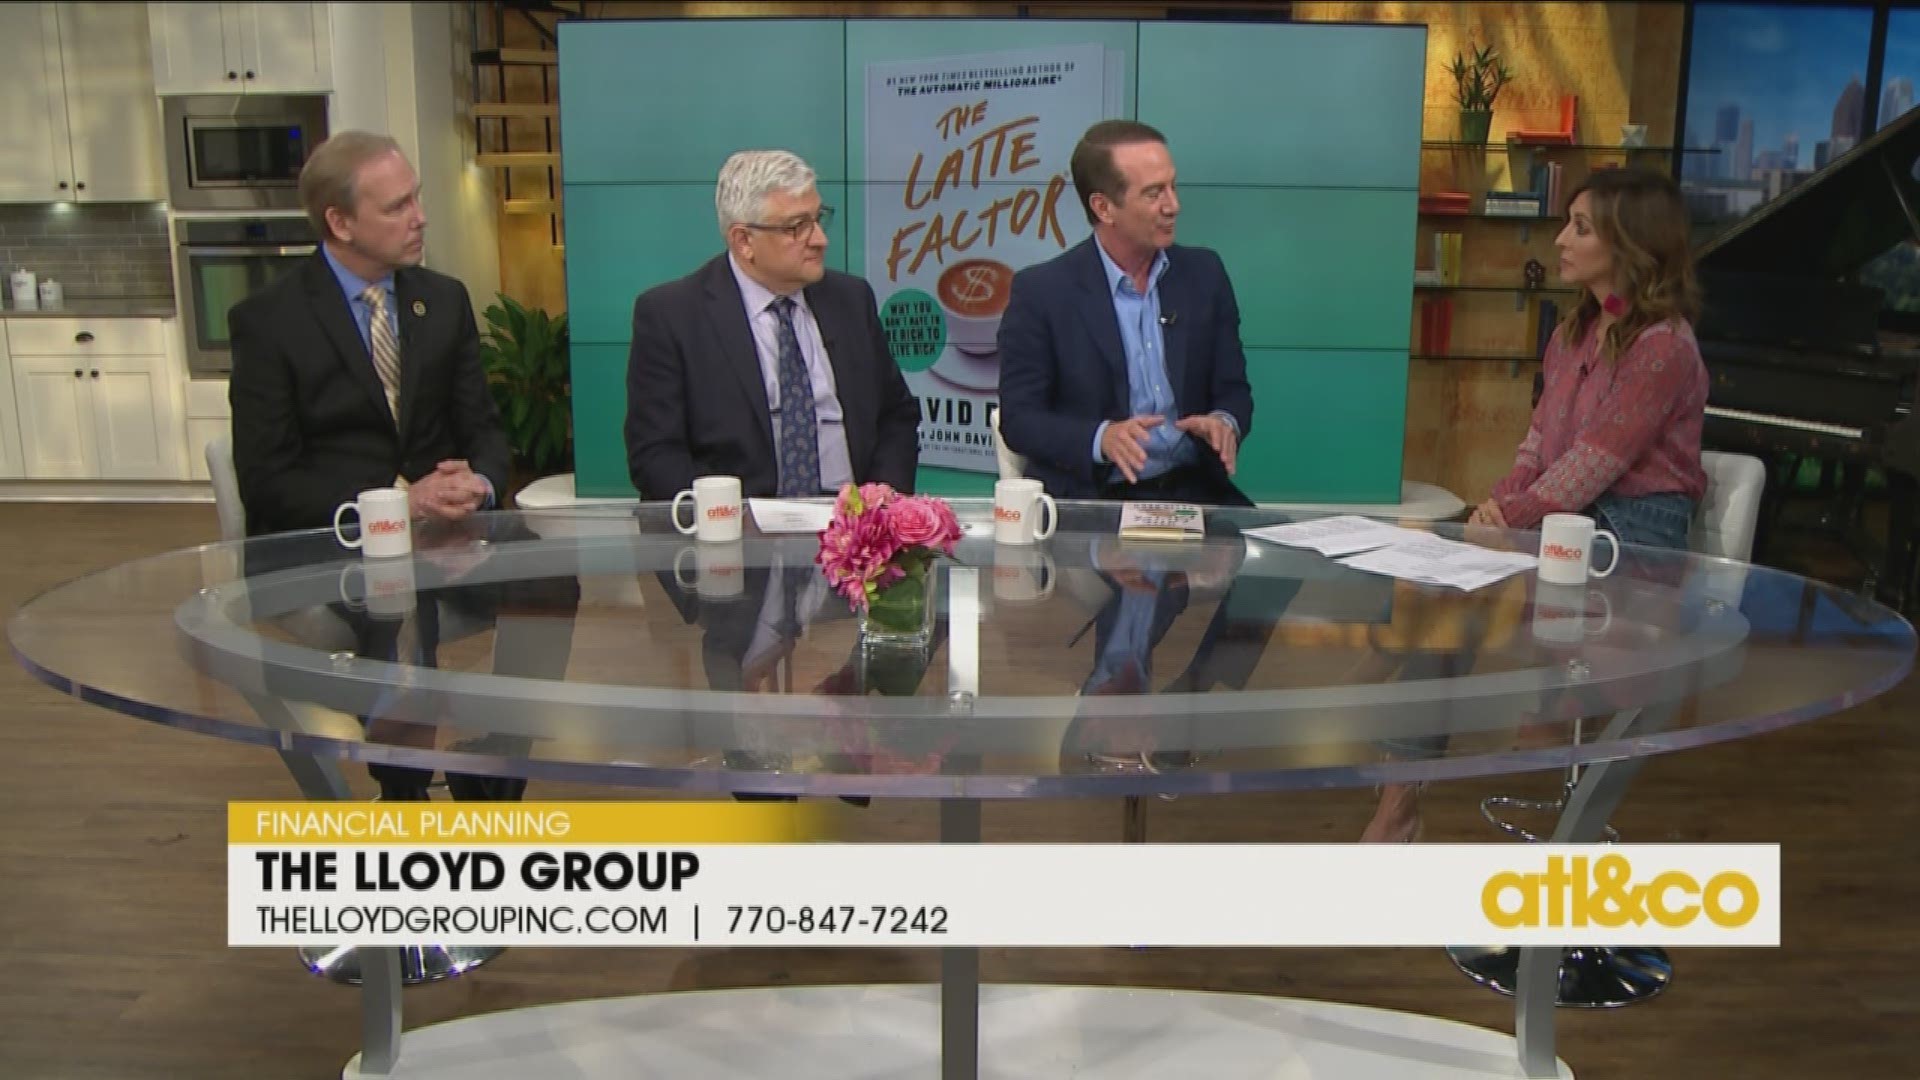 Financial Planning with The Lloyd Group and The Latte Factor